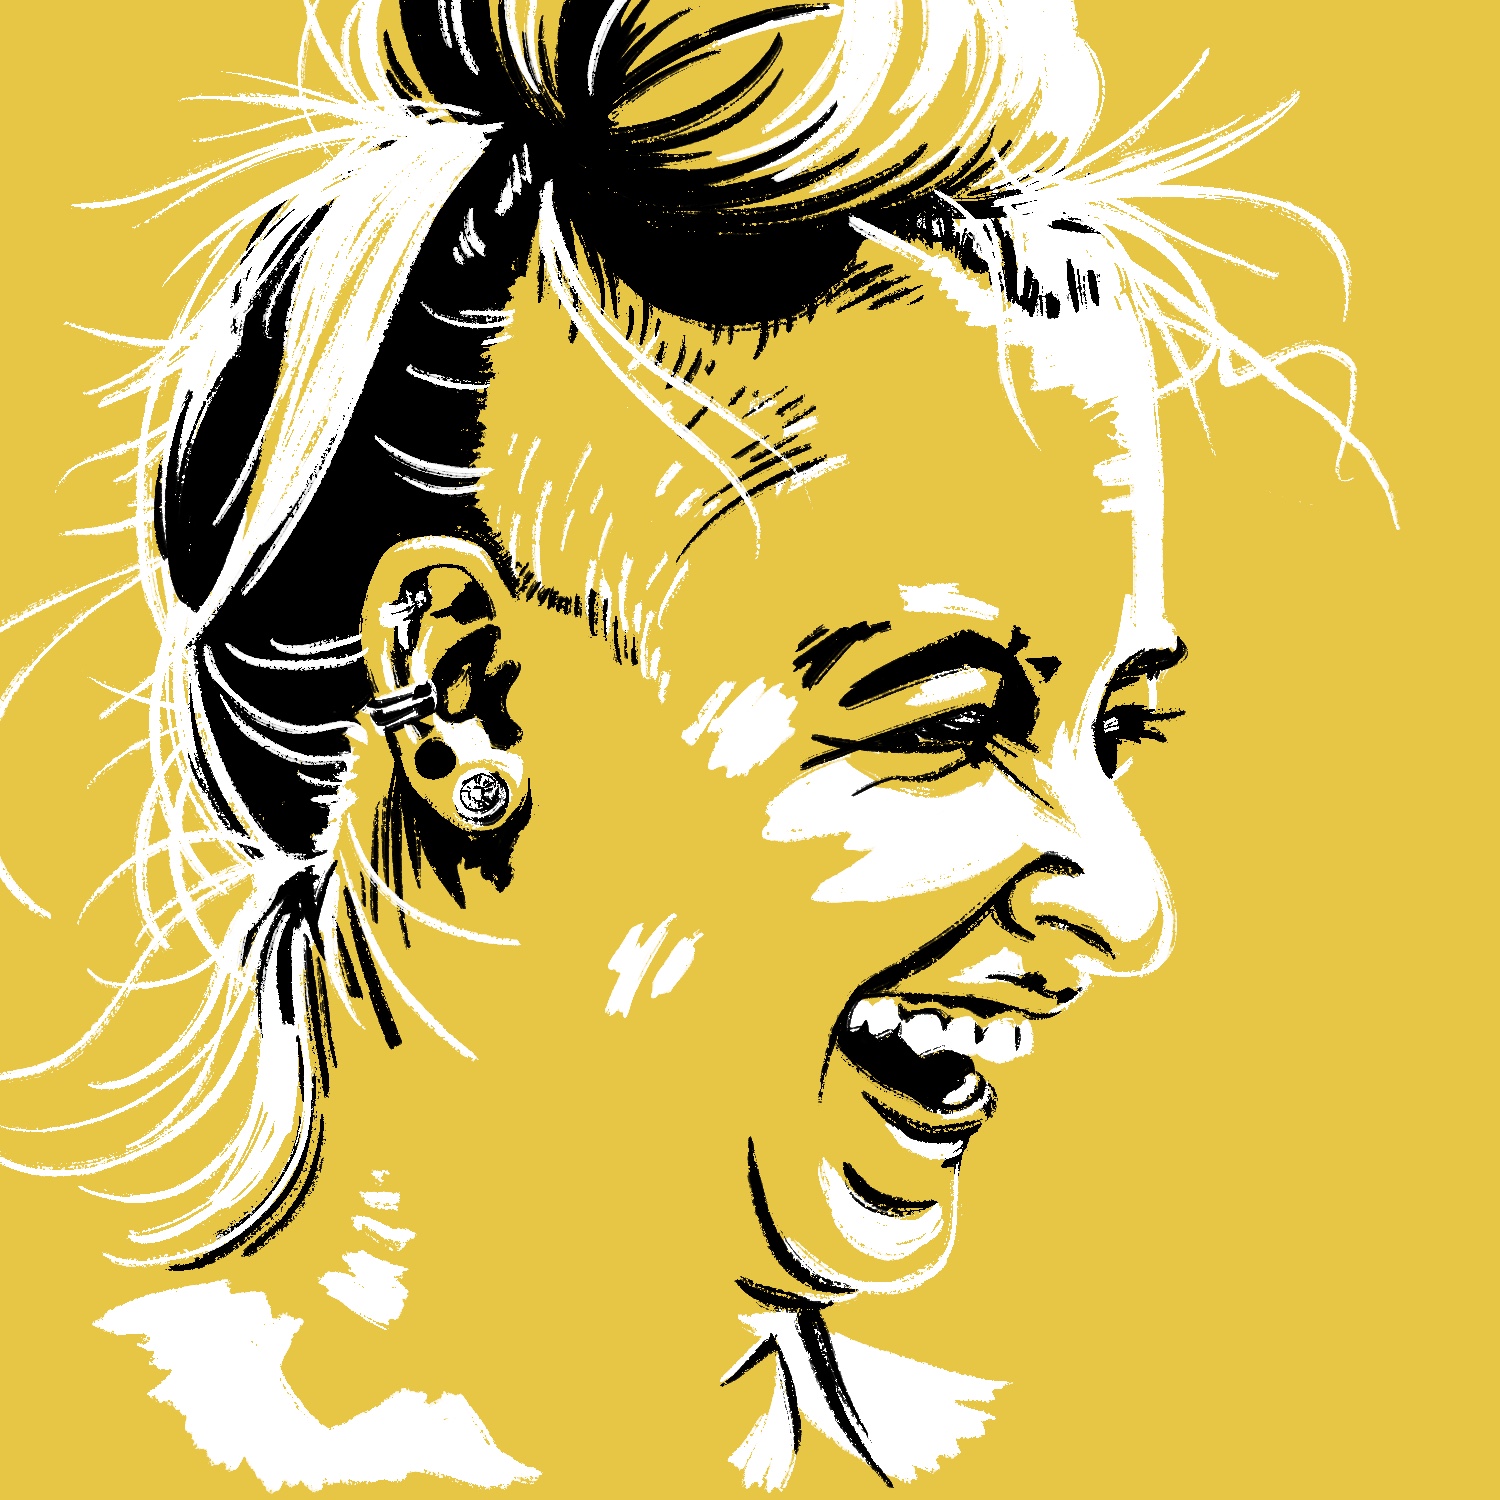 An illustration of a woman laughing. The drawing is done in a style where only the highlights and shadows are drawn over the background color, which is a medium-dark yellow. The highlights and shadows are pure white and black. The woman is facing to the right and has her mouth slightly open. Her eyes are squinted. She has multiple earrings in her ear, and her hair is up, with stray hairs sticking out everywhere.